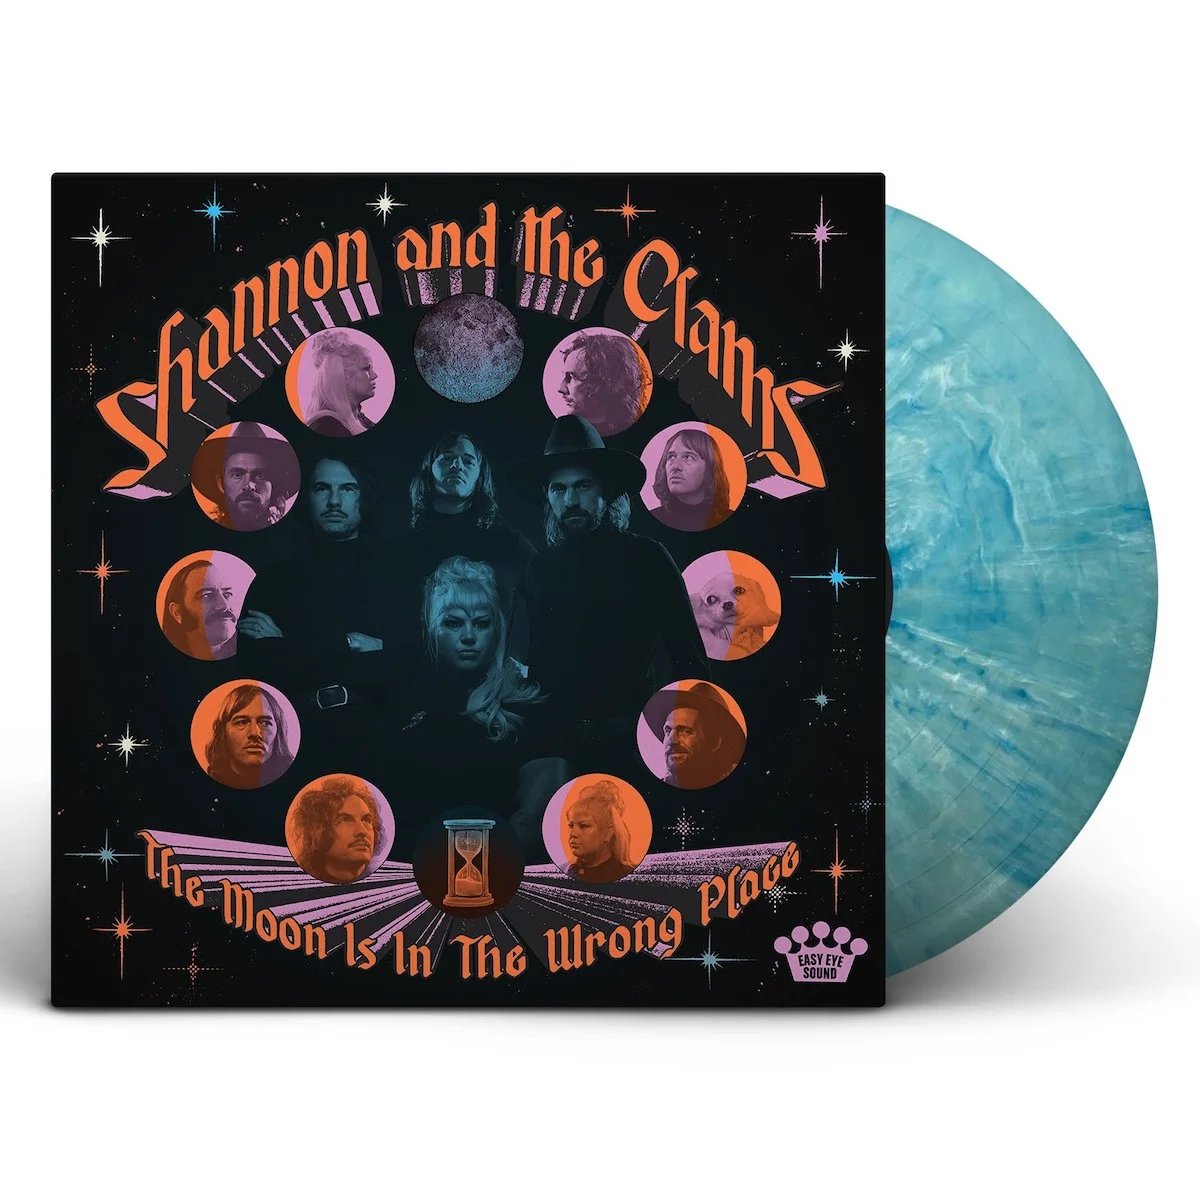 JUST IN! 'The Moon Is In The Wrong Place' by Shannon and The Clams Late 60s garage rock and psych-pop meet once more on the new @shanandtheclams LP, complete with pearls of surf, doo-wop, and Brill Building influences Dan Auerbach produces @easyeyesound normanrecords.com/records/201507…